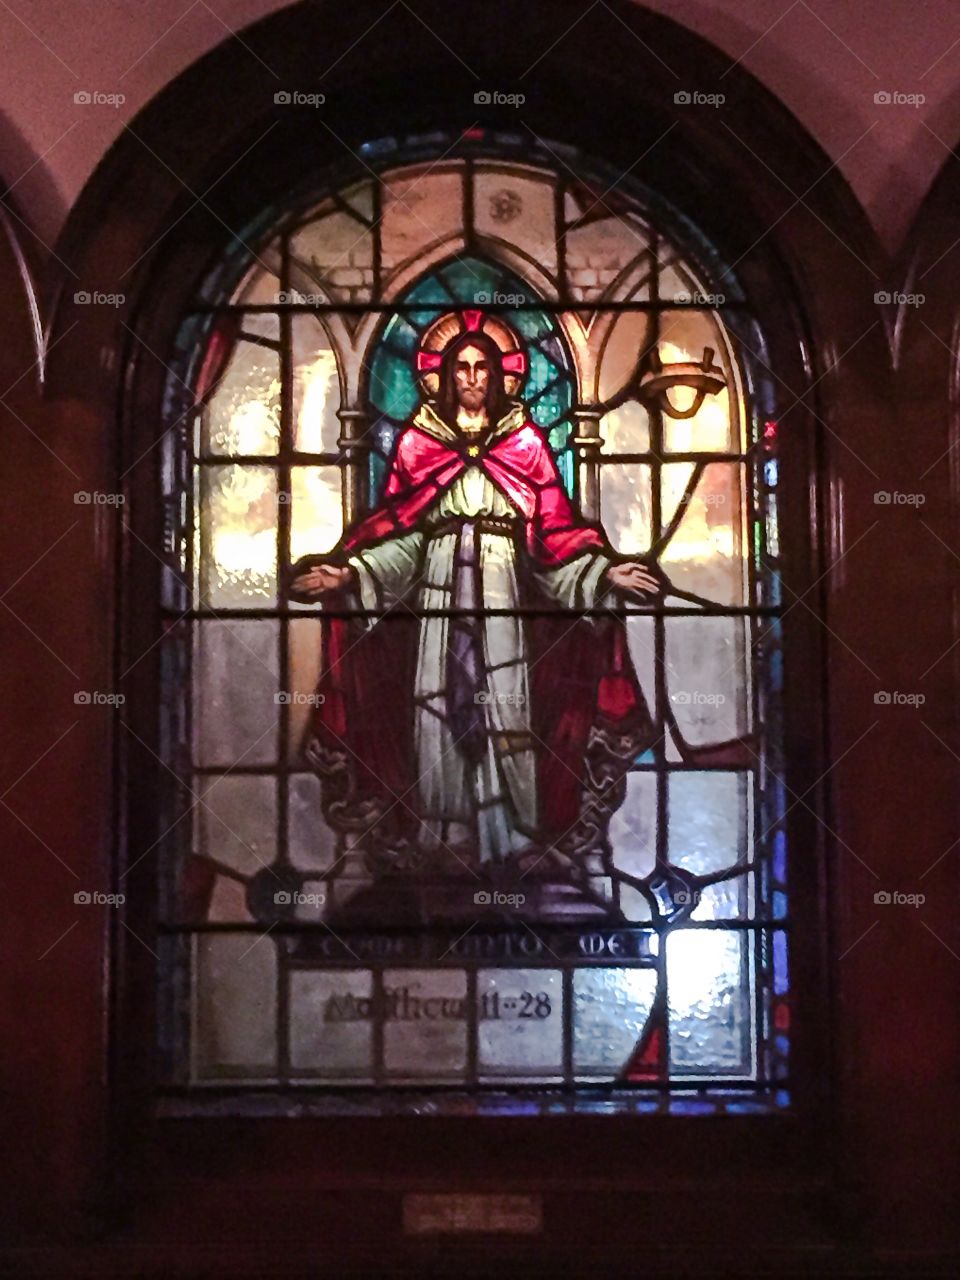 The risen Christ. Stained glass window of Jesus at Westminster Presbyterian Church in Minneapolis, Minnesota 